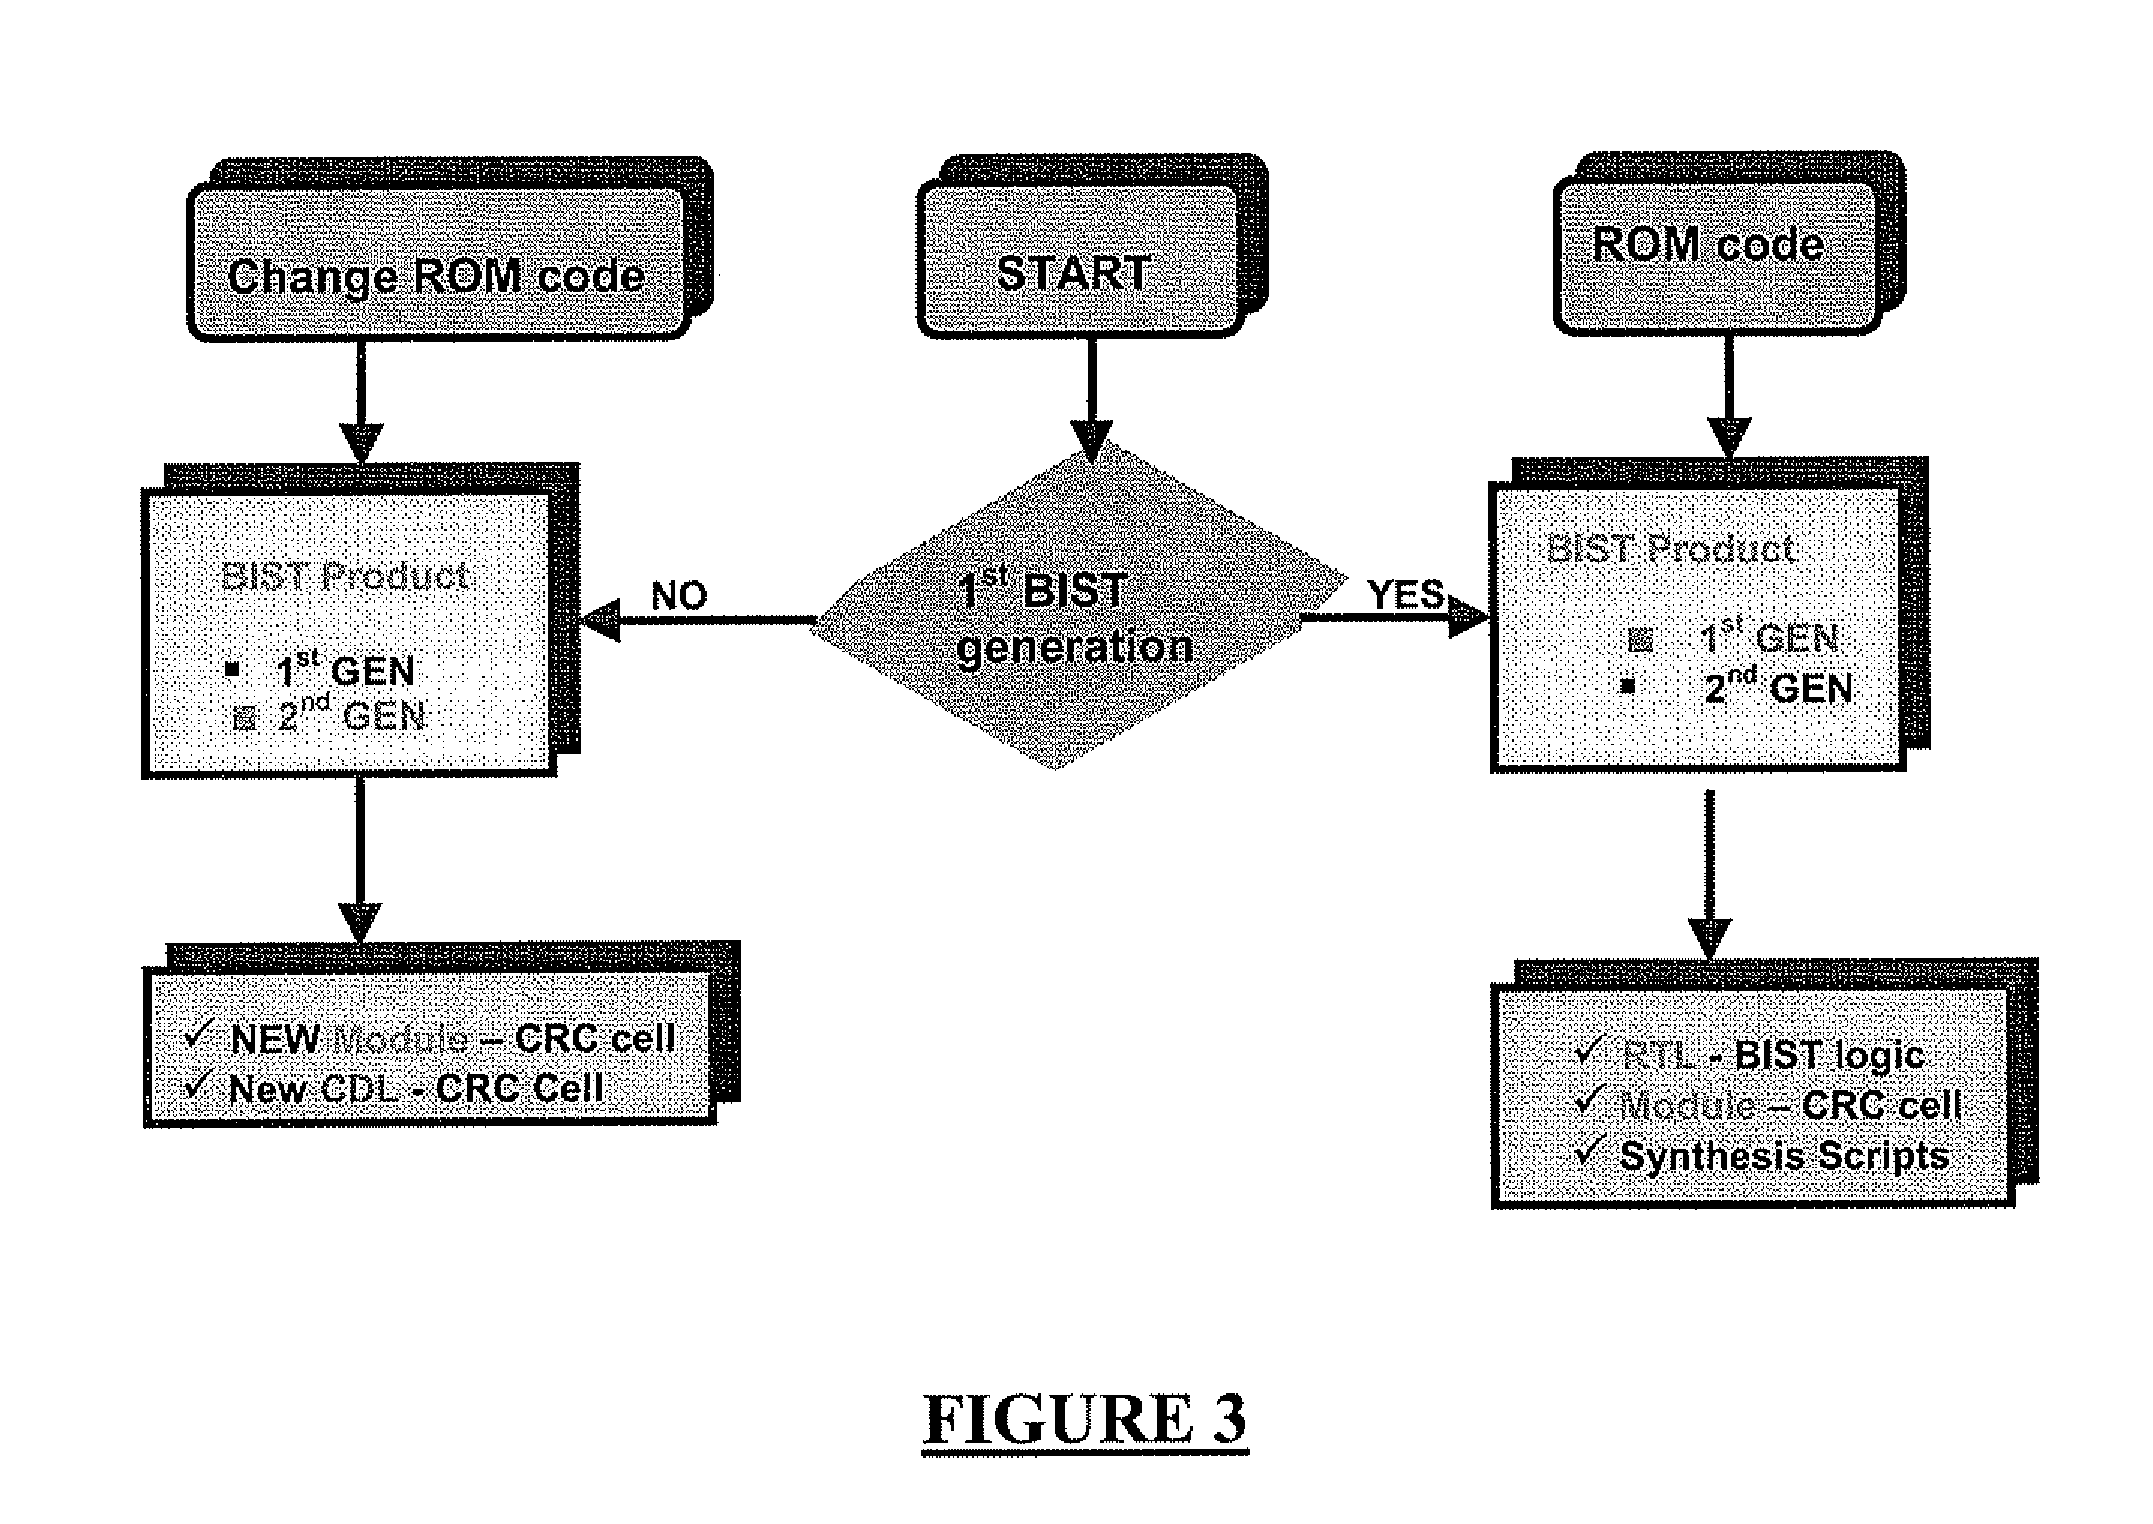 Process and system for the verification of correct functioning of an on-chip memory